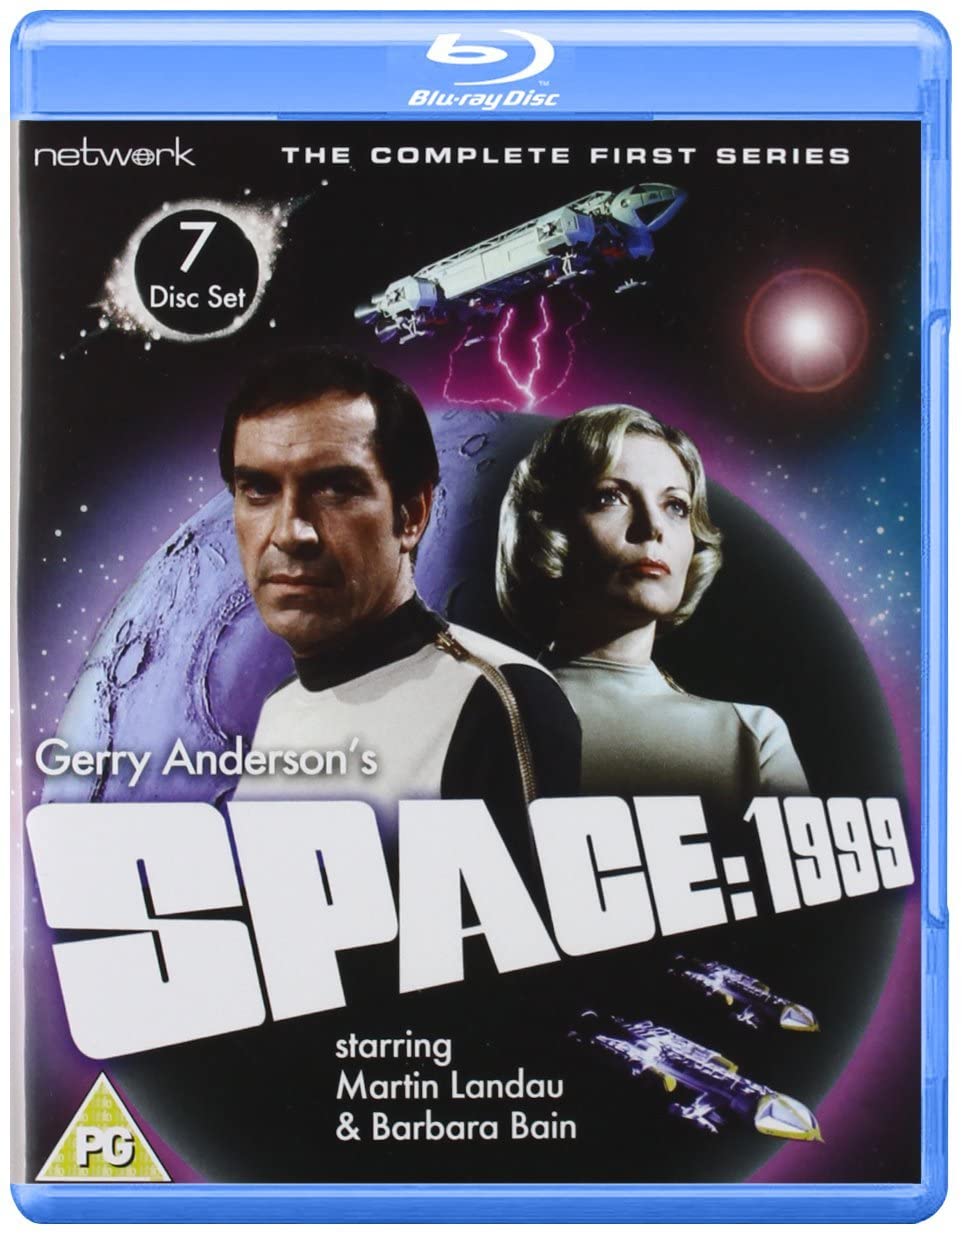 Space 1999 - The Complete First Series [1975] - Sci-fi [Blu-ray]